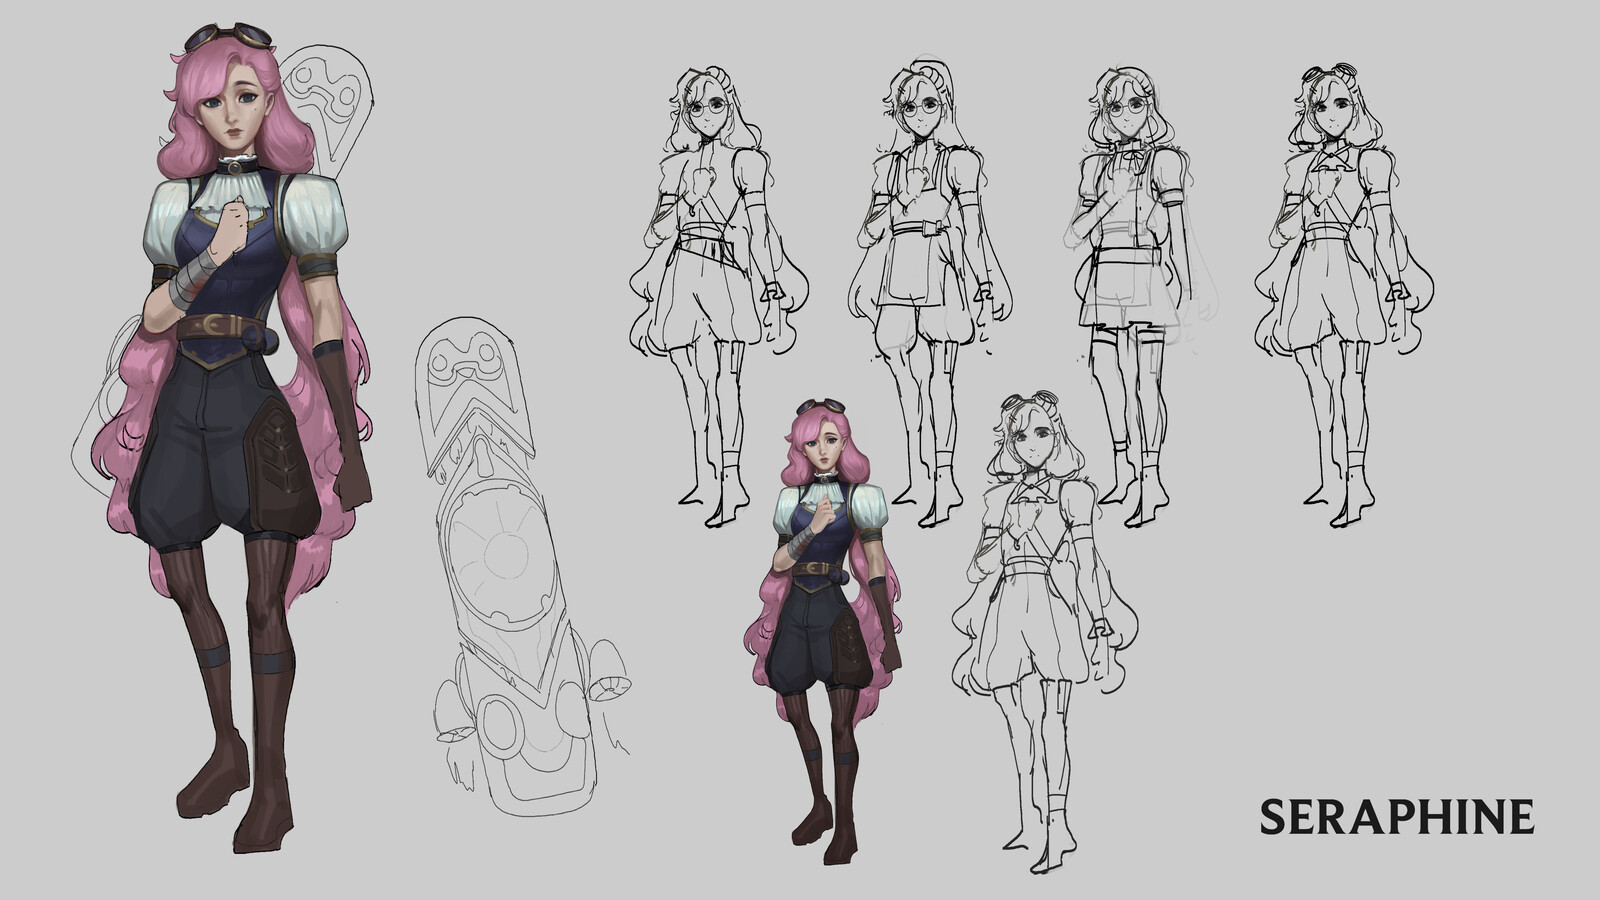 Some of the sketches and preliminary render I had!